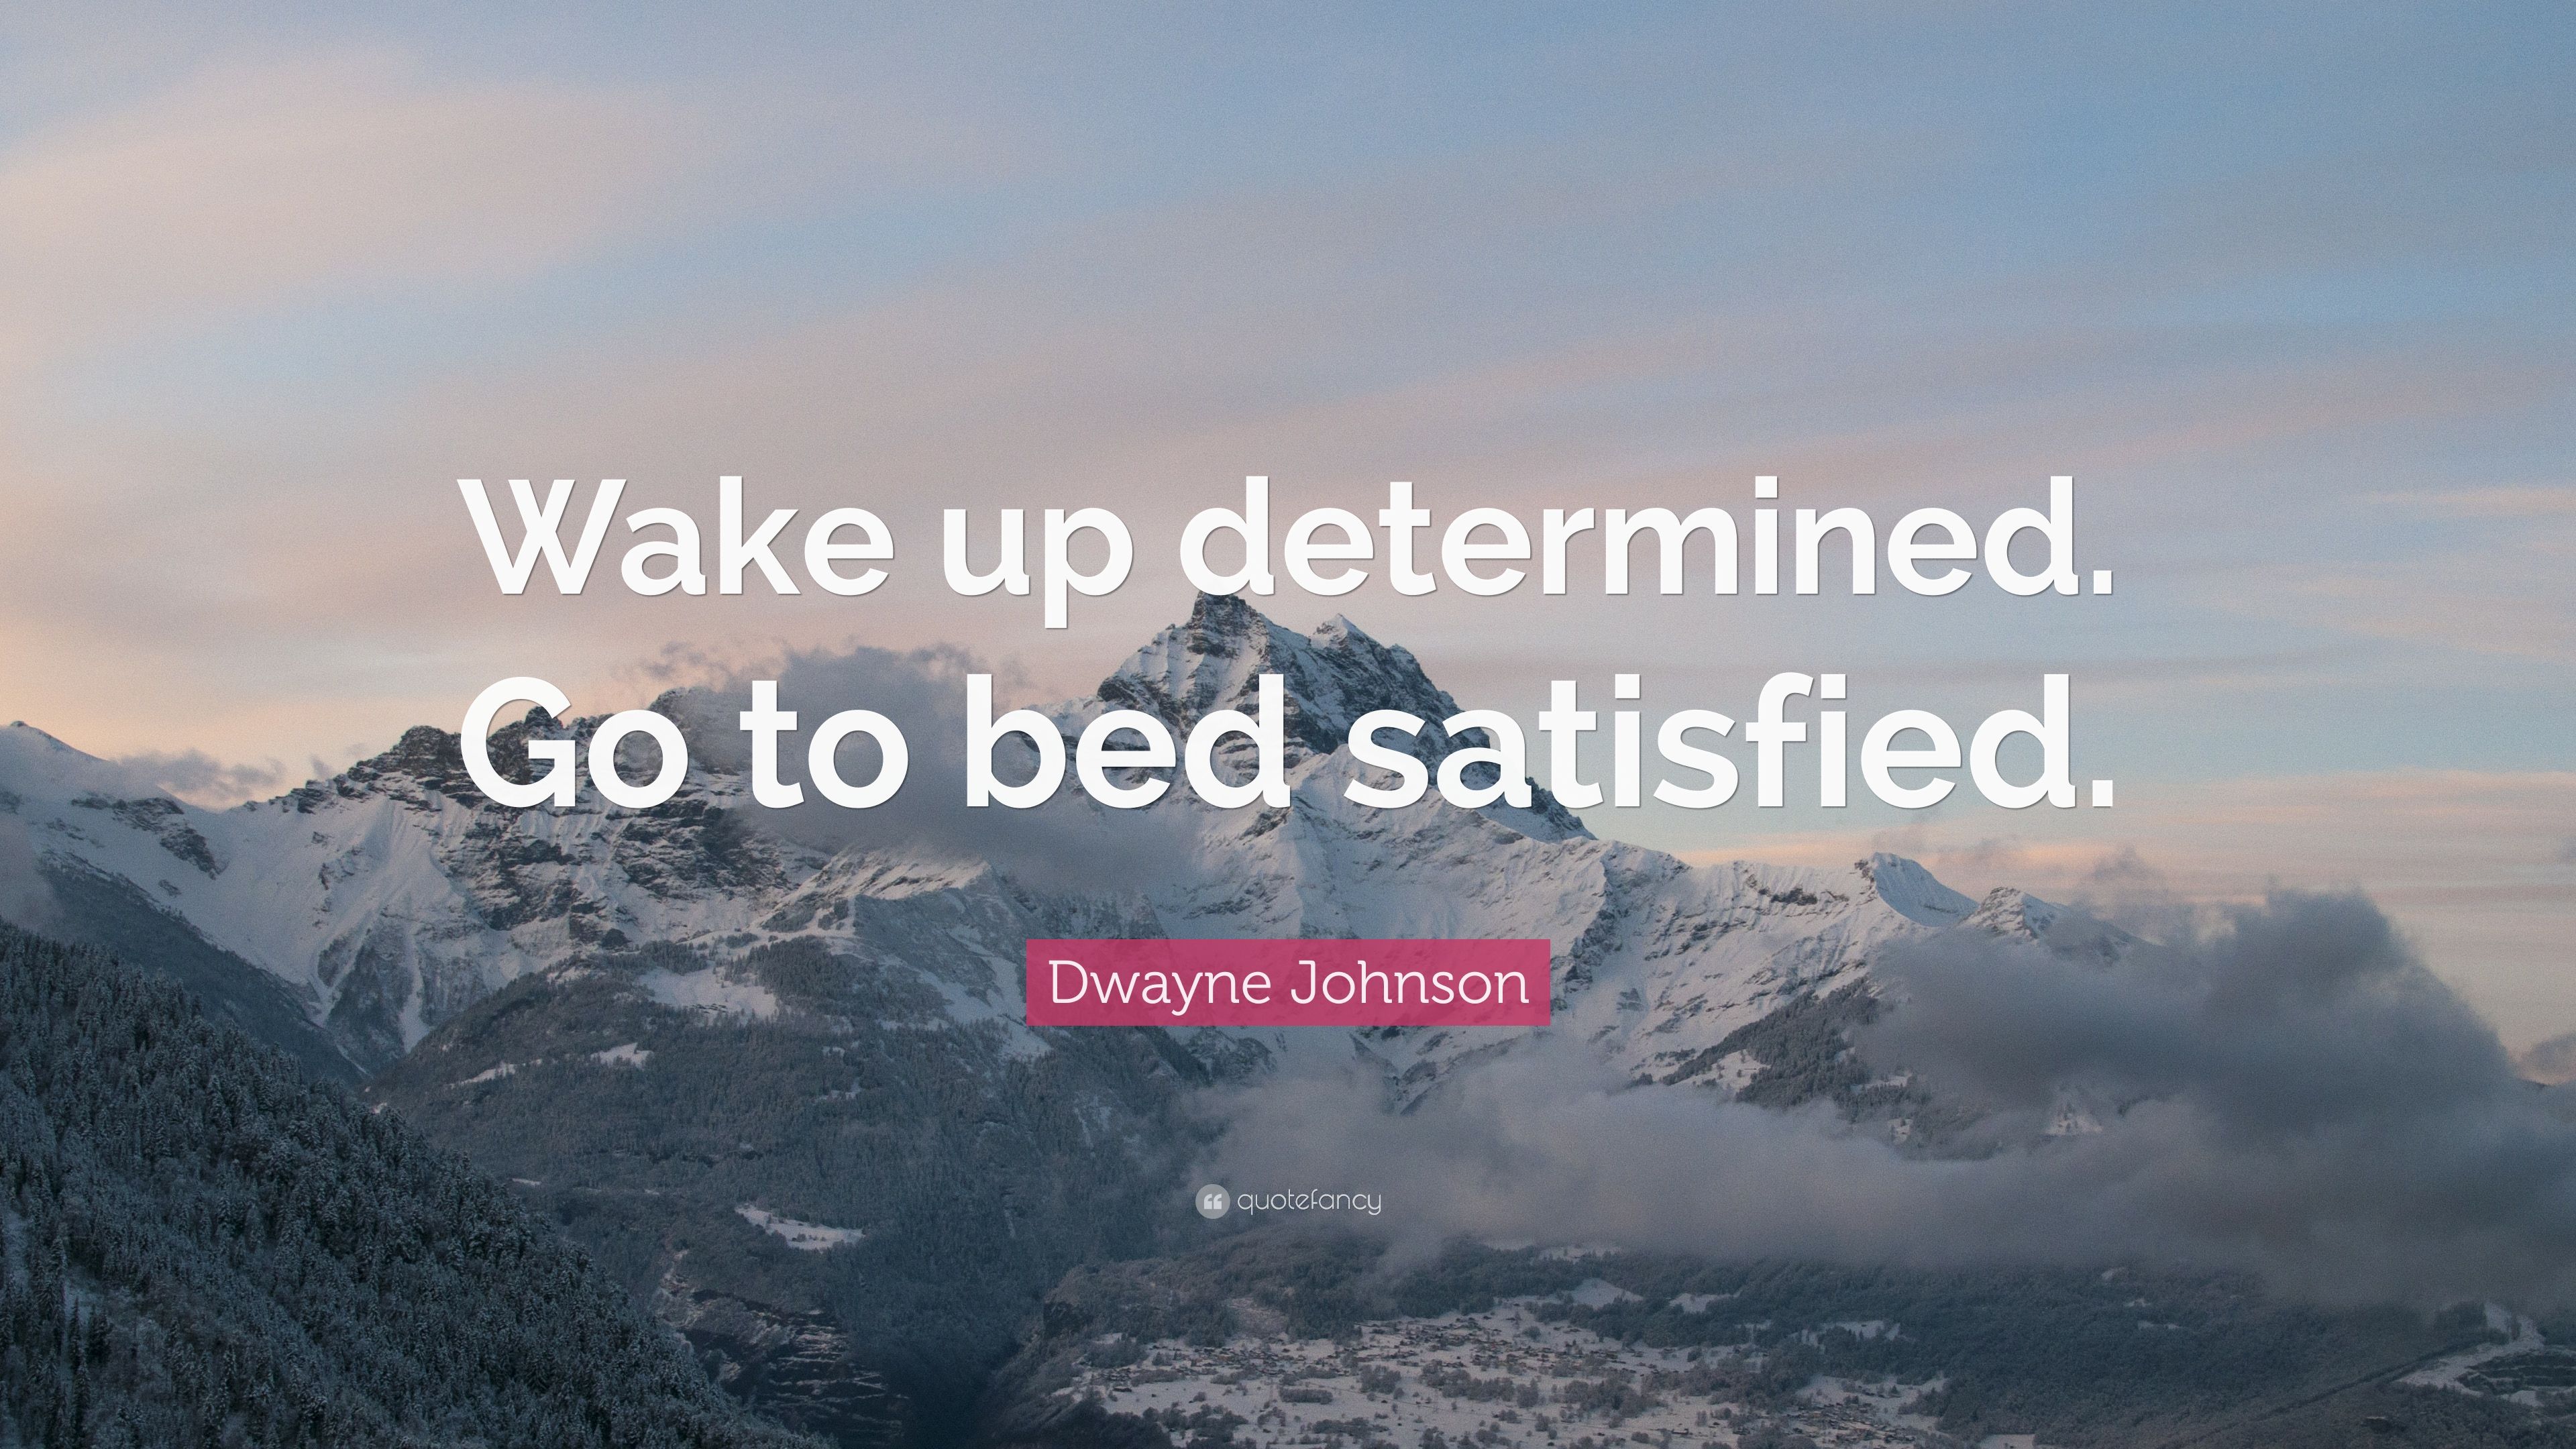 Dwayne Johnson Quote: “Wake up determined. Go to bed satisfied.” 12